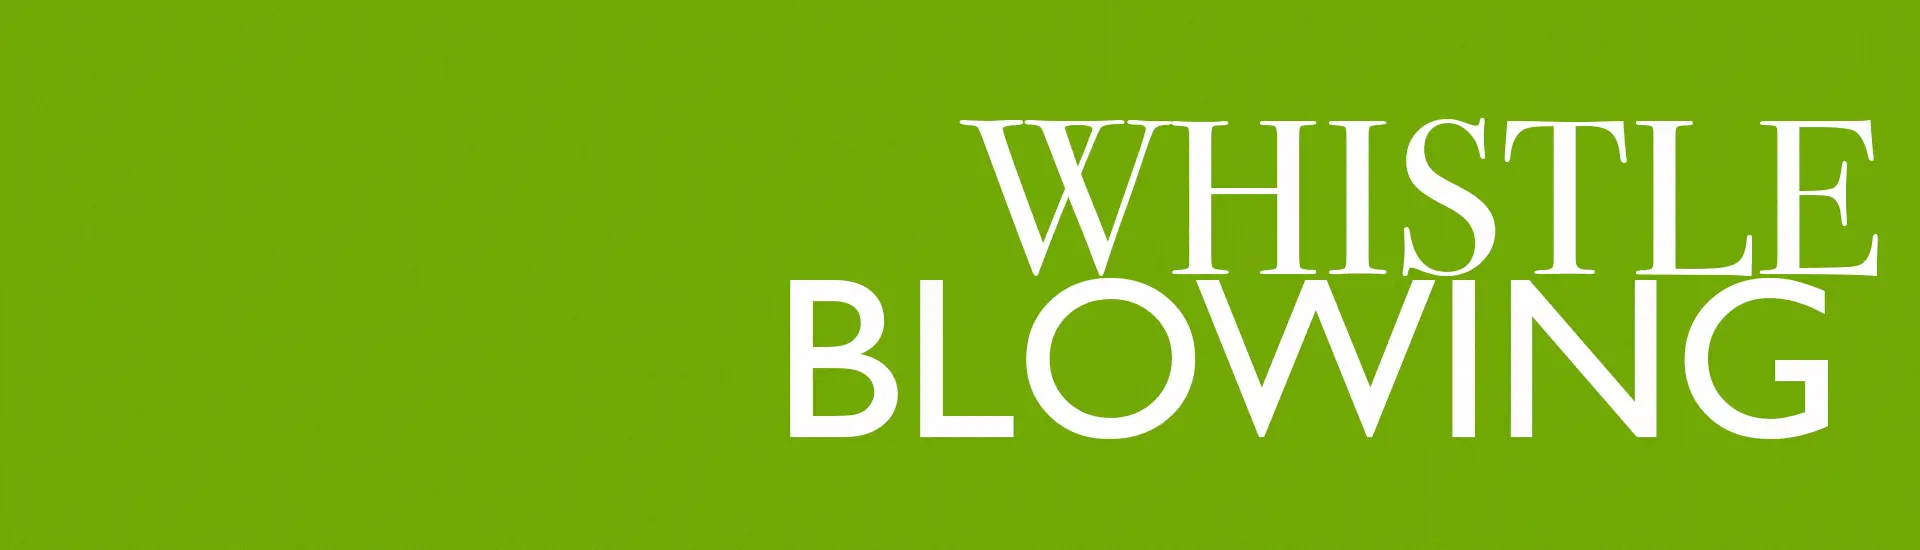 whisteblowing-cover.img